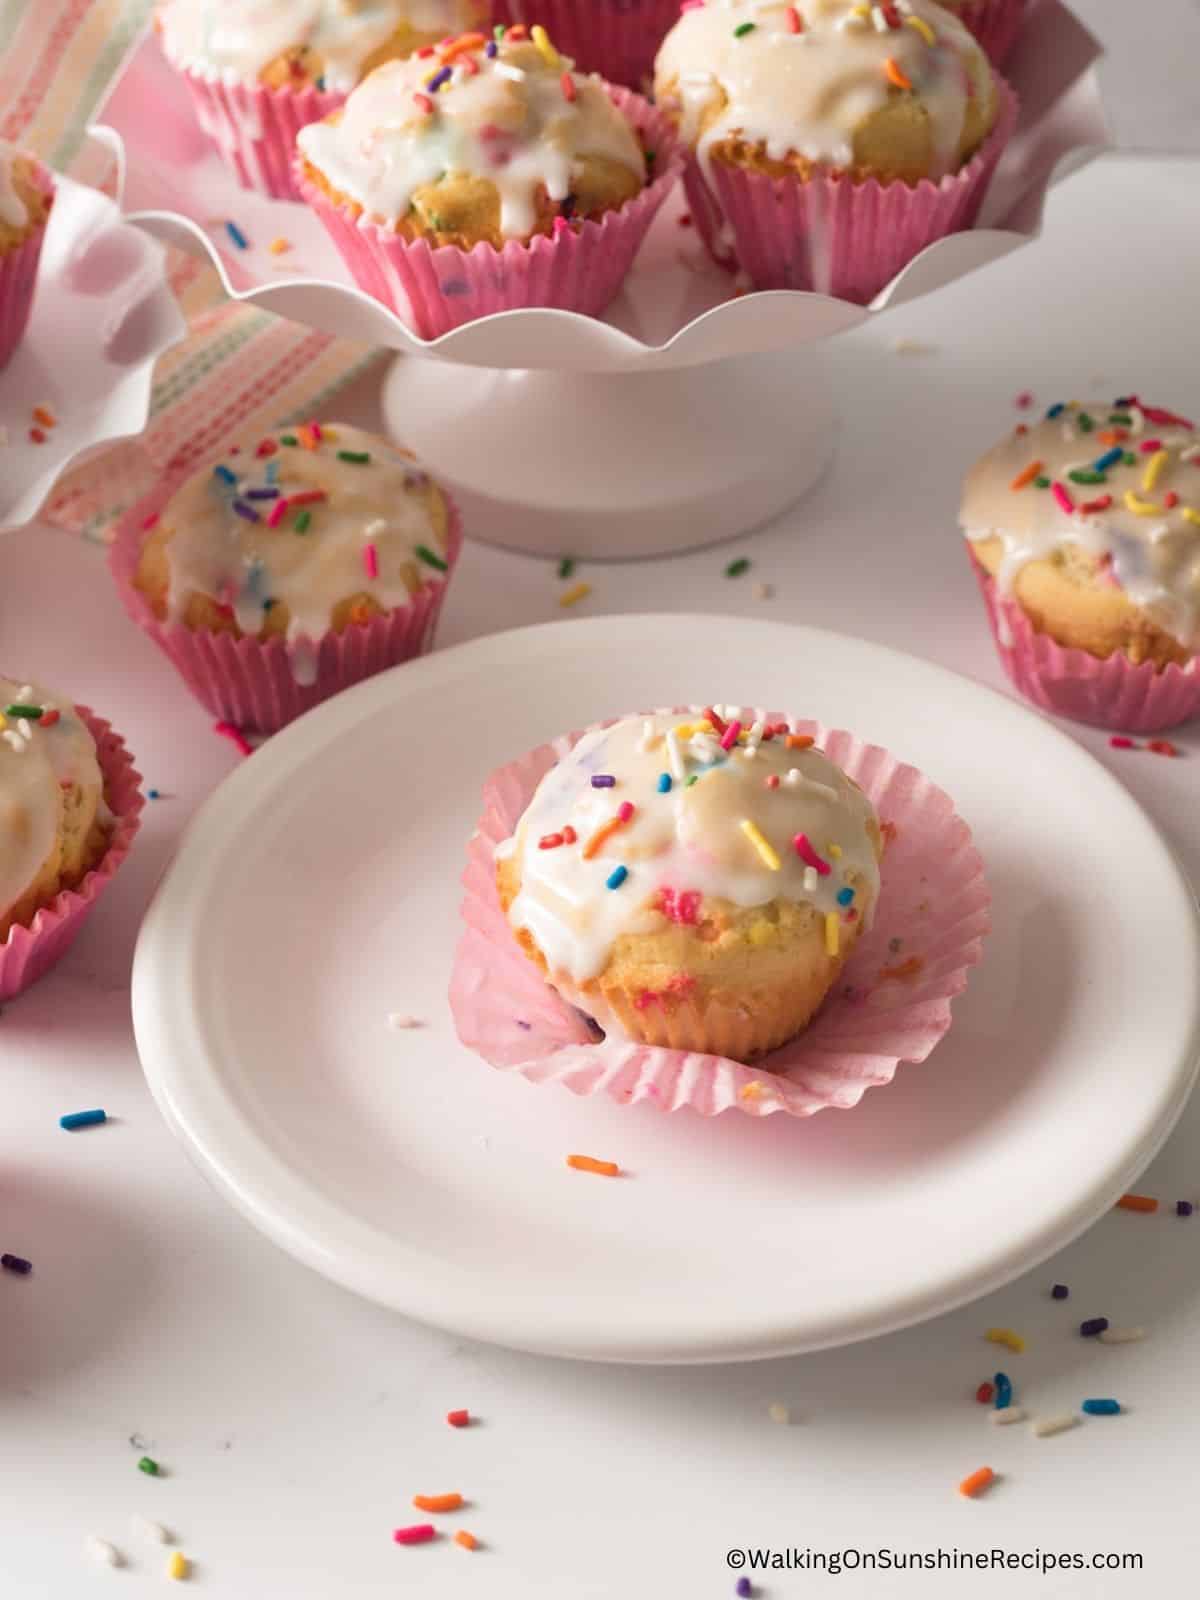 one party muffin on plate with sprinkles scattered around.